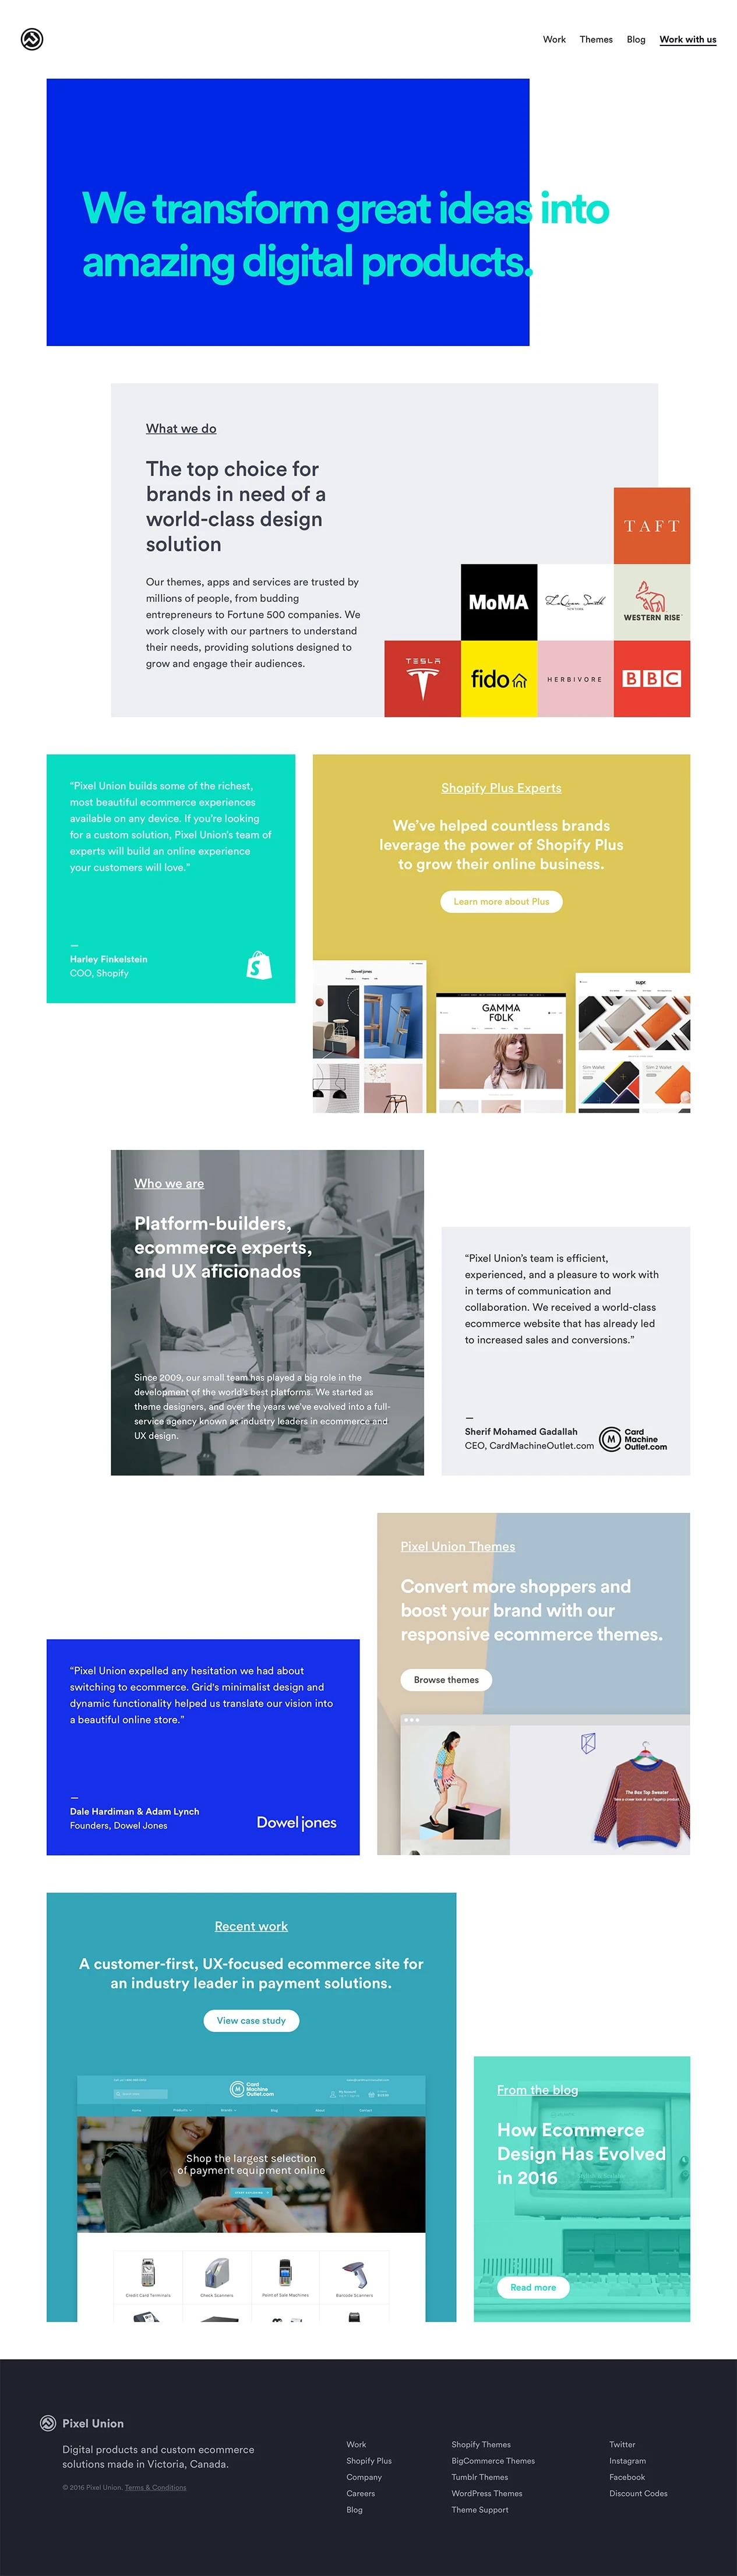 Pixel Union Landing Page Example: Shopify and BigCommerce themes, plus custom ecommerce solutions by leading theme creators Pixel Union. Check out the themes that power over 10,000 stores.